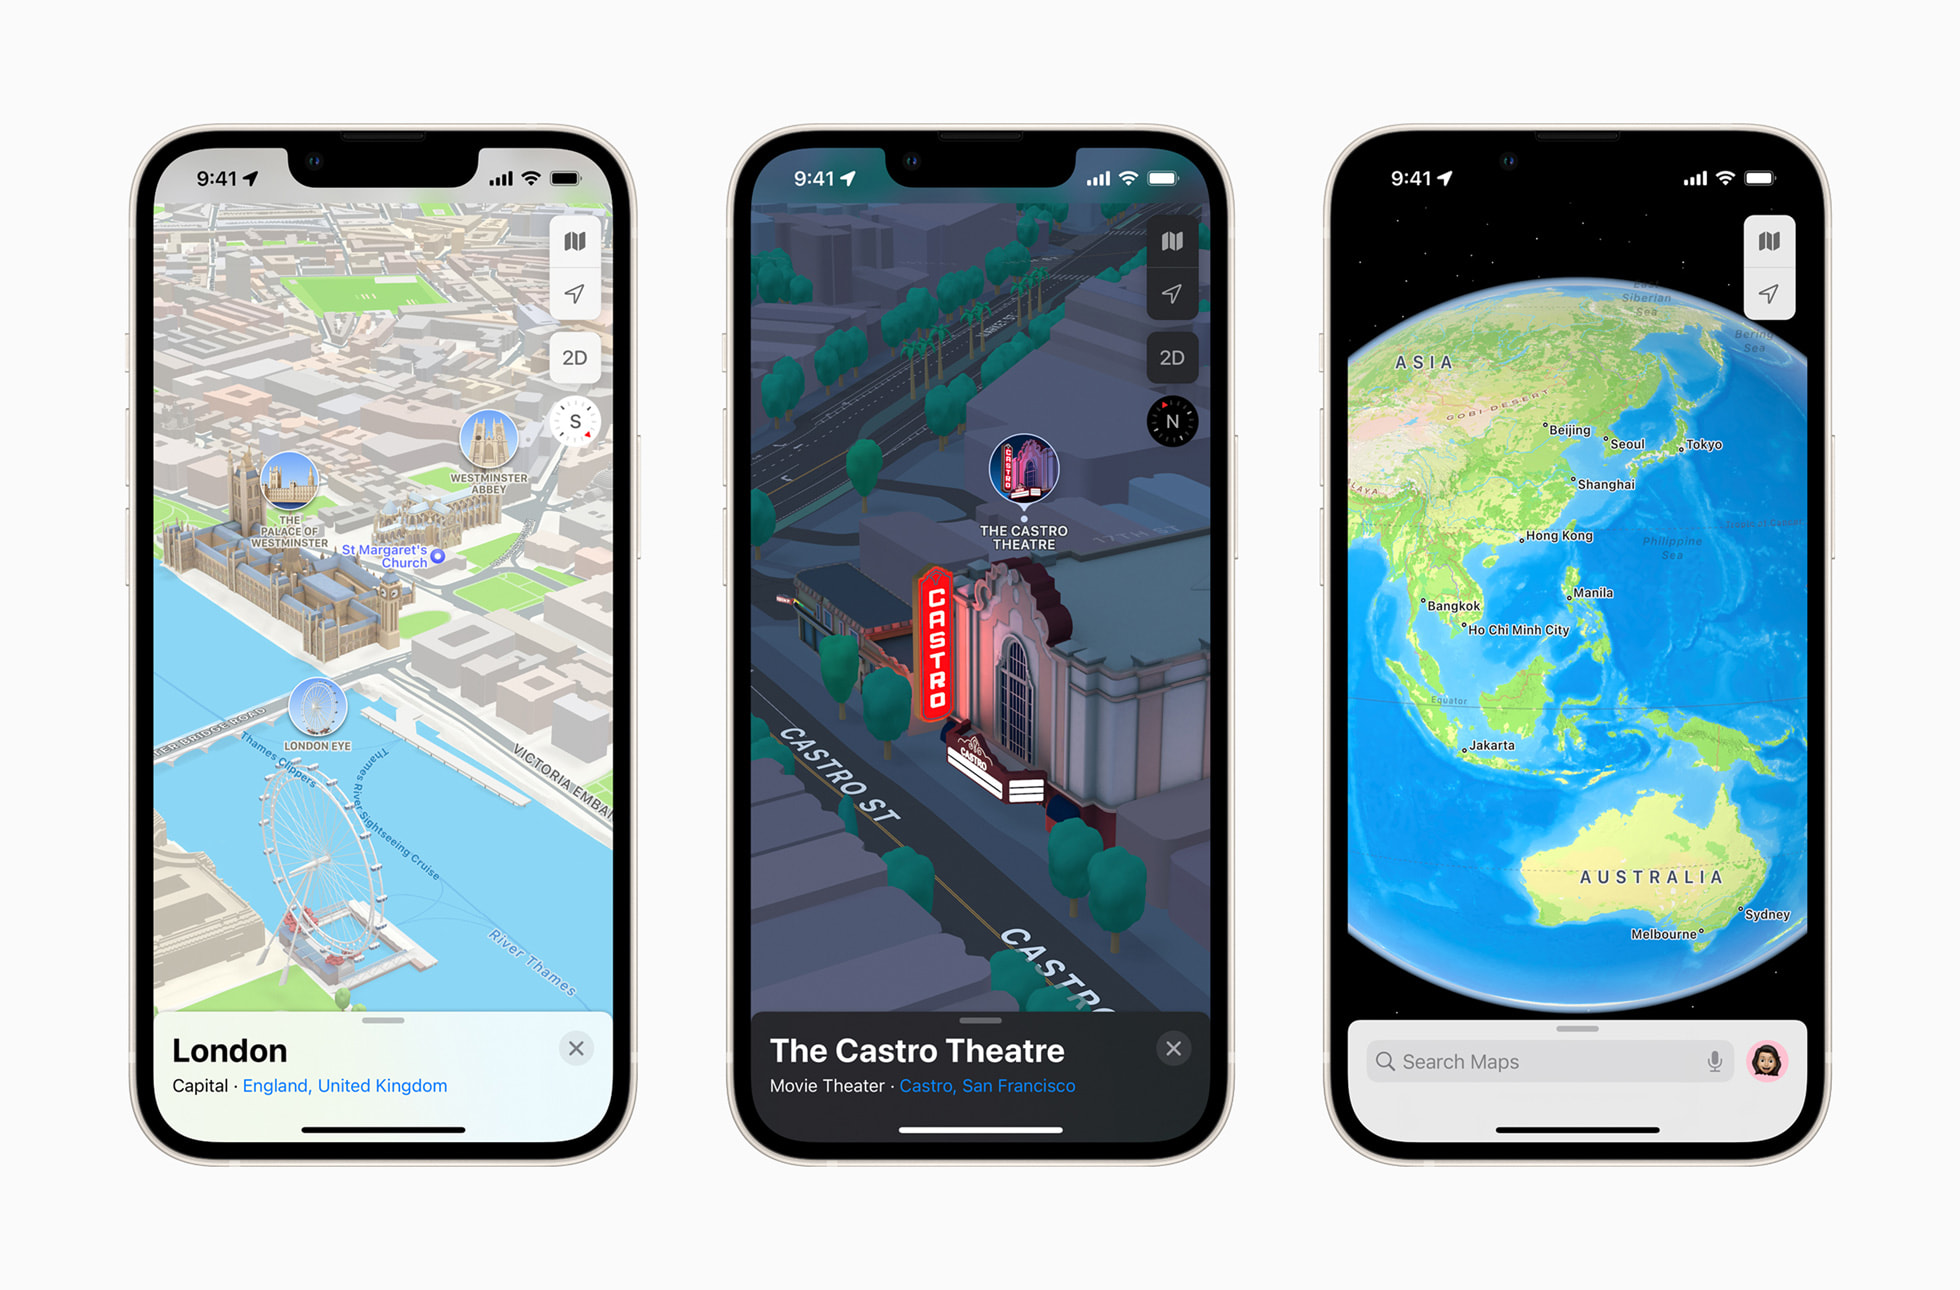 Apple Maps introduces new ways to explore major cities in 3D Apple